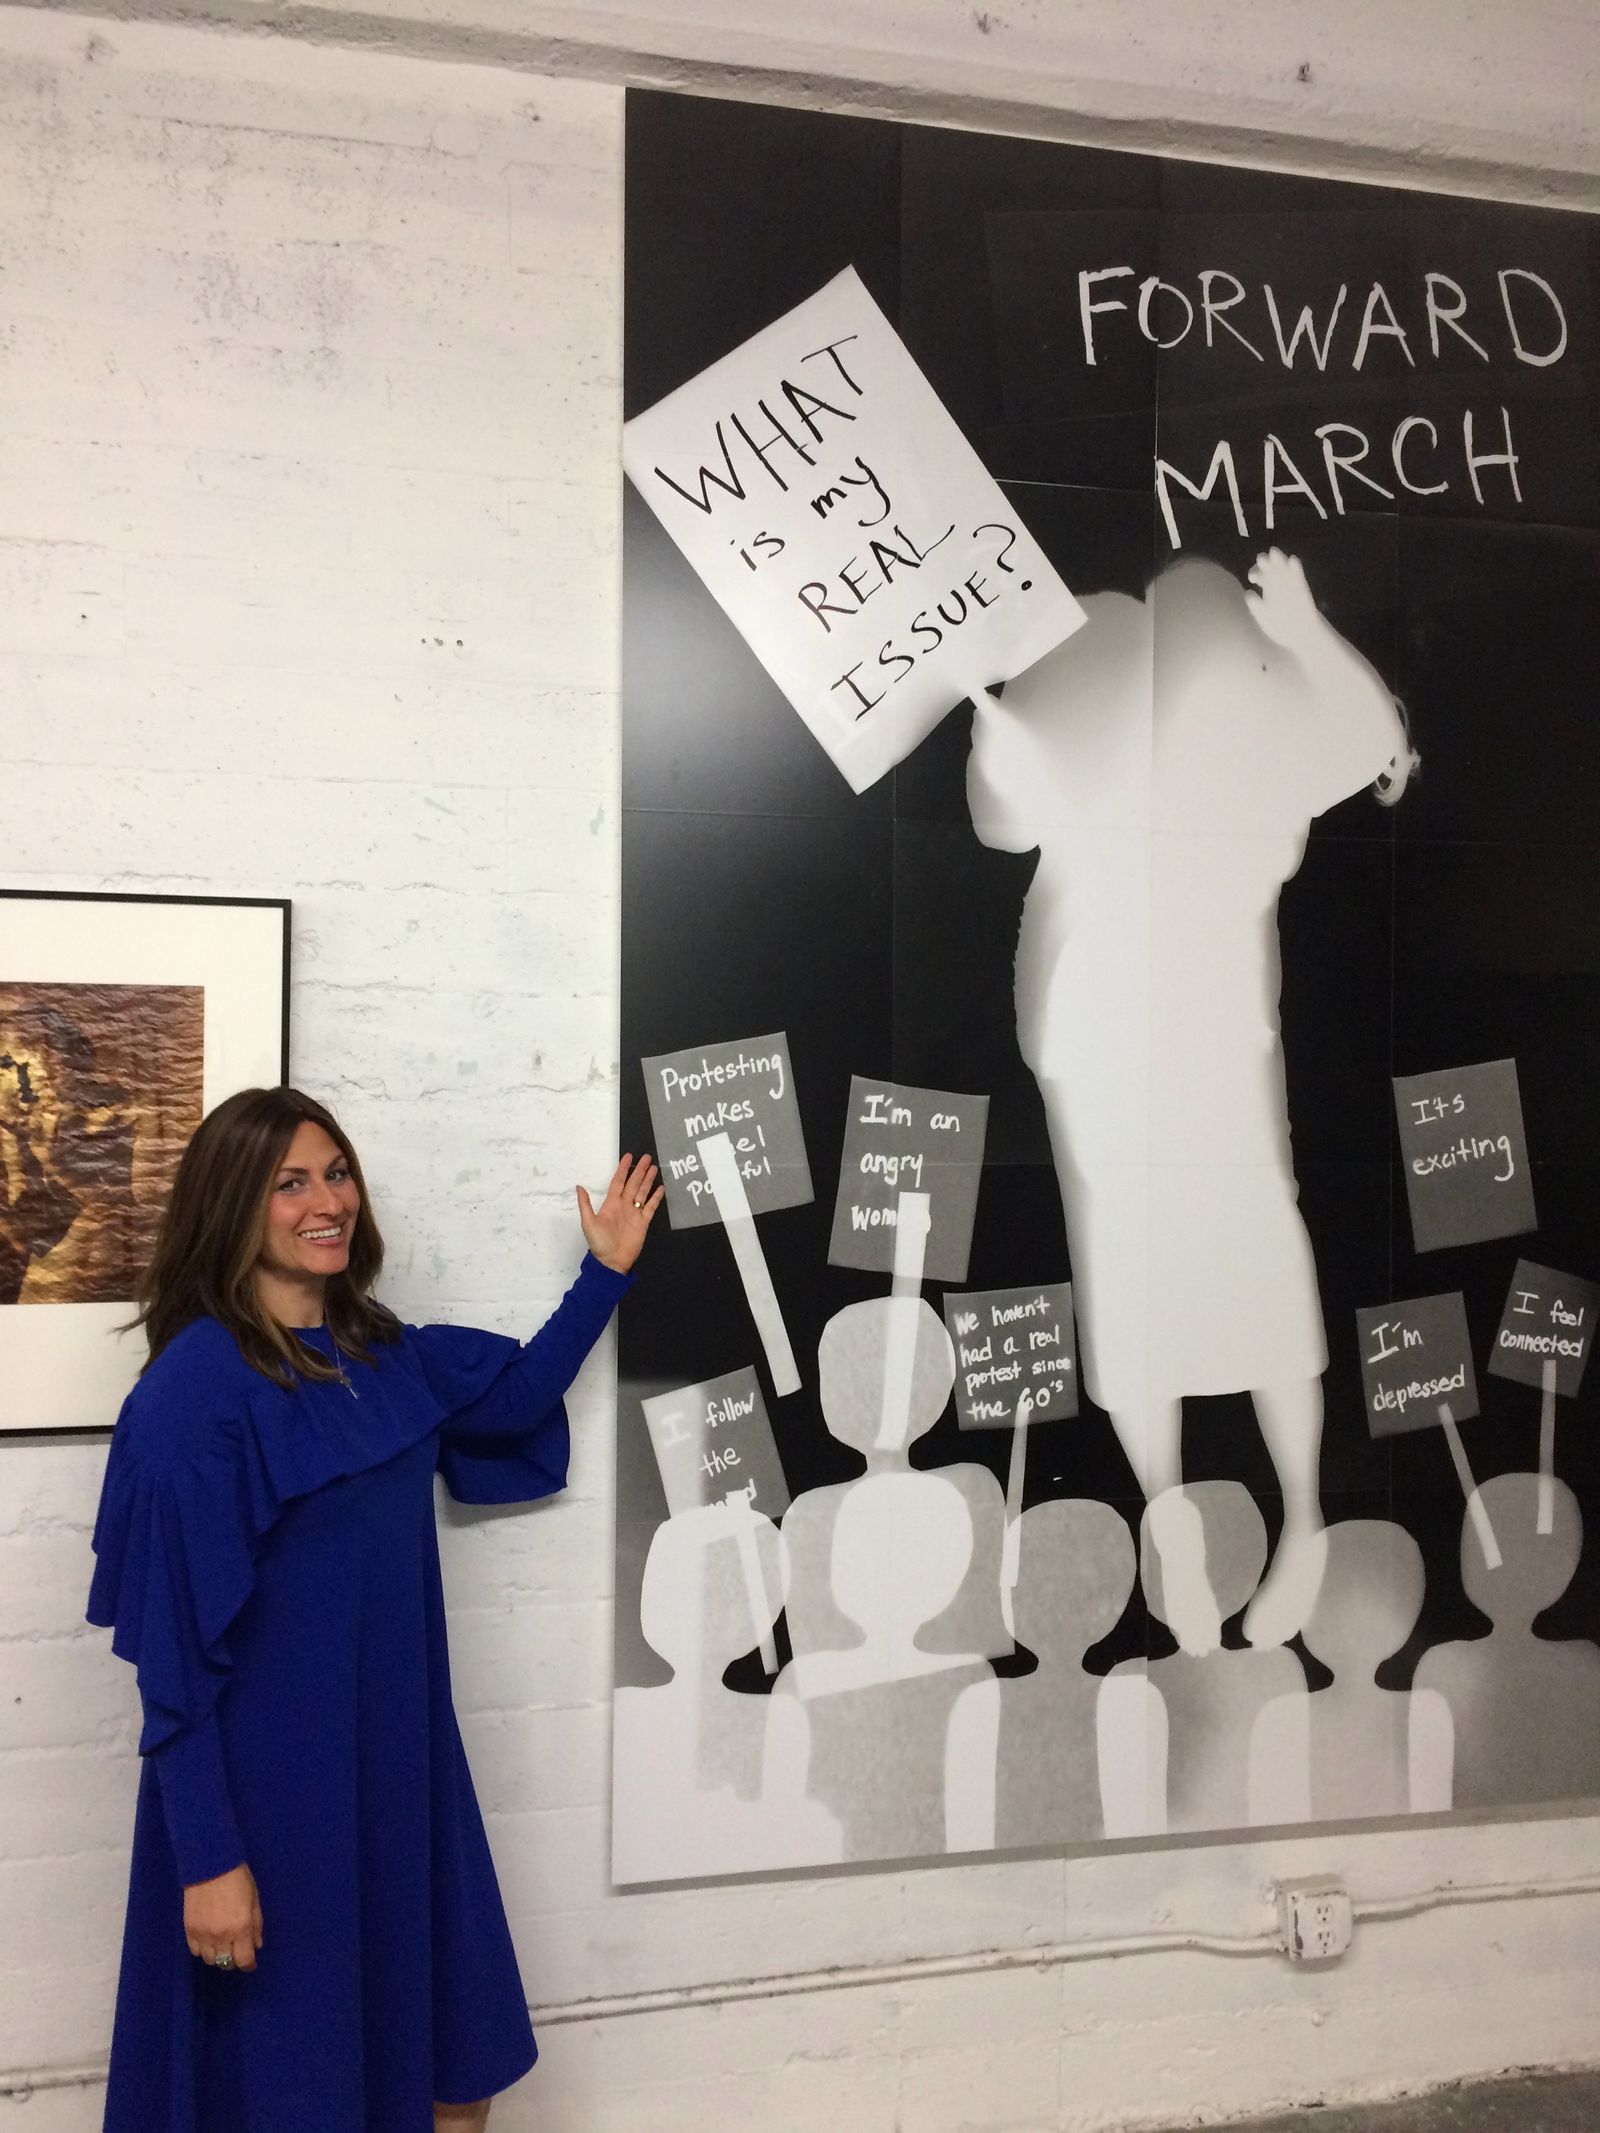 © Karen Amy Finkel Fishof - Protest - photogram with Sharpie - 64"x100" - on wall to show scale